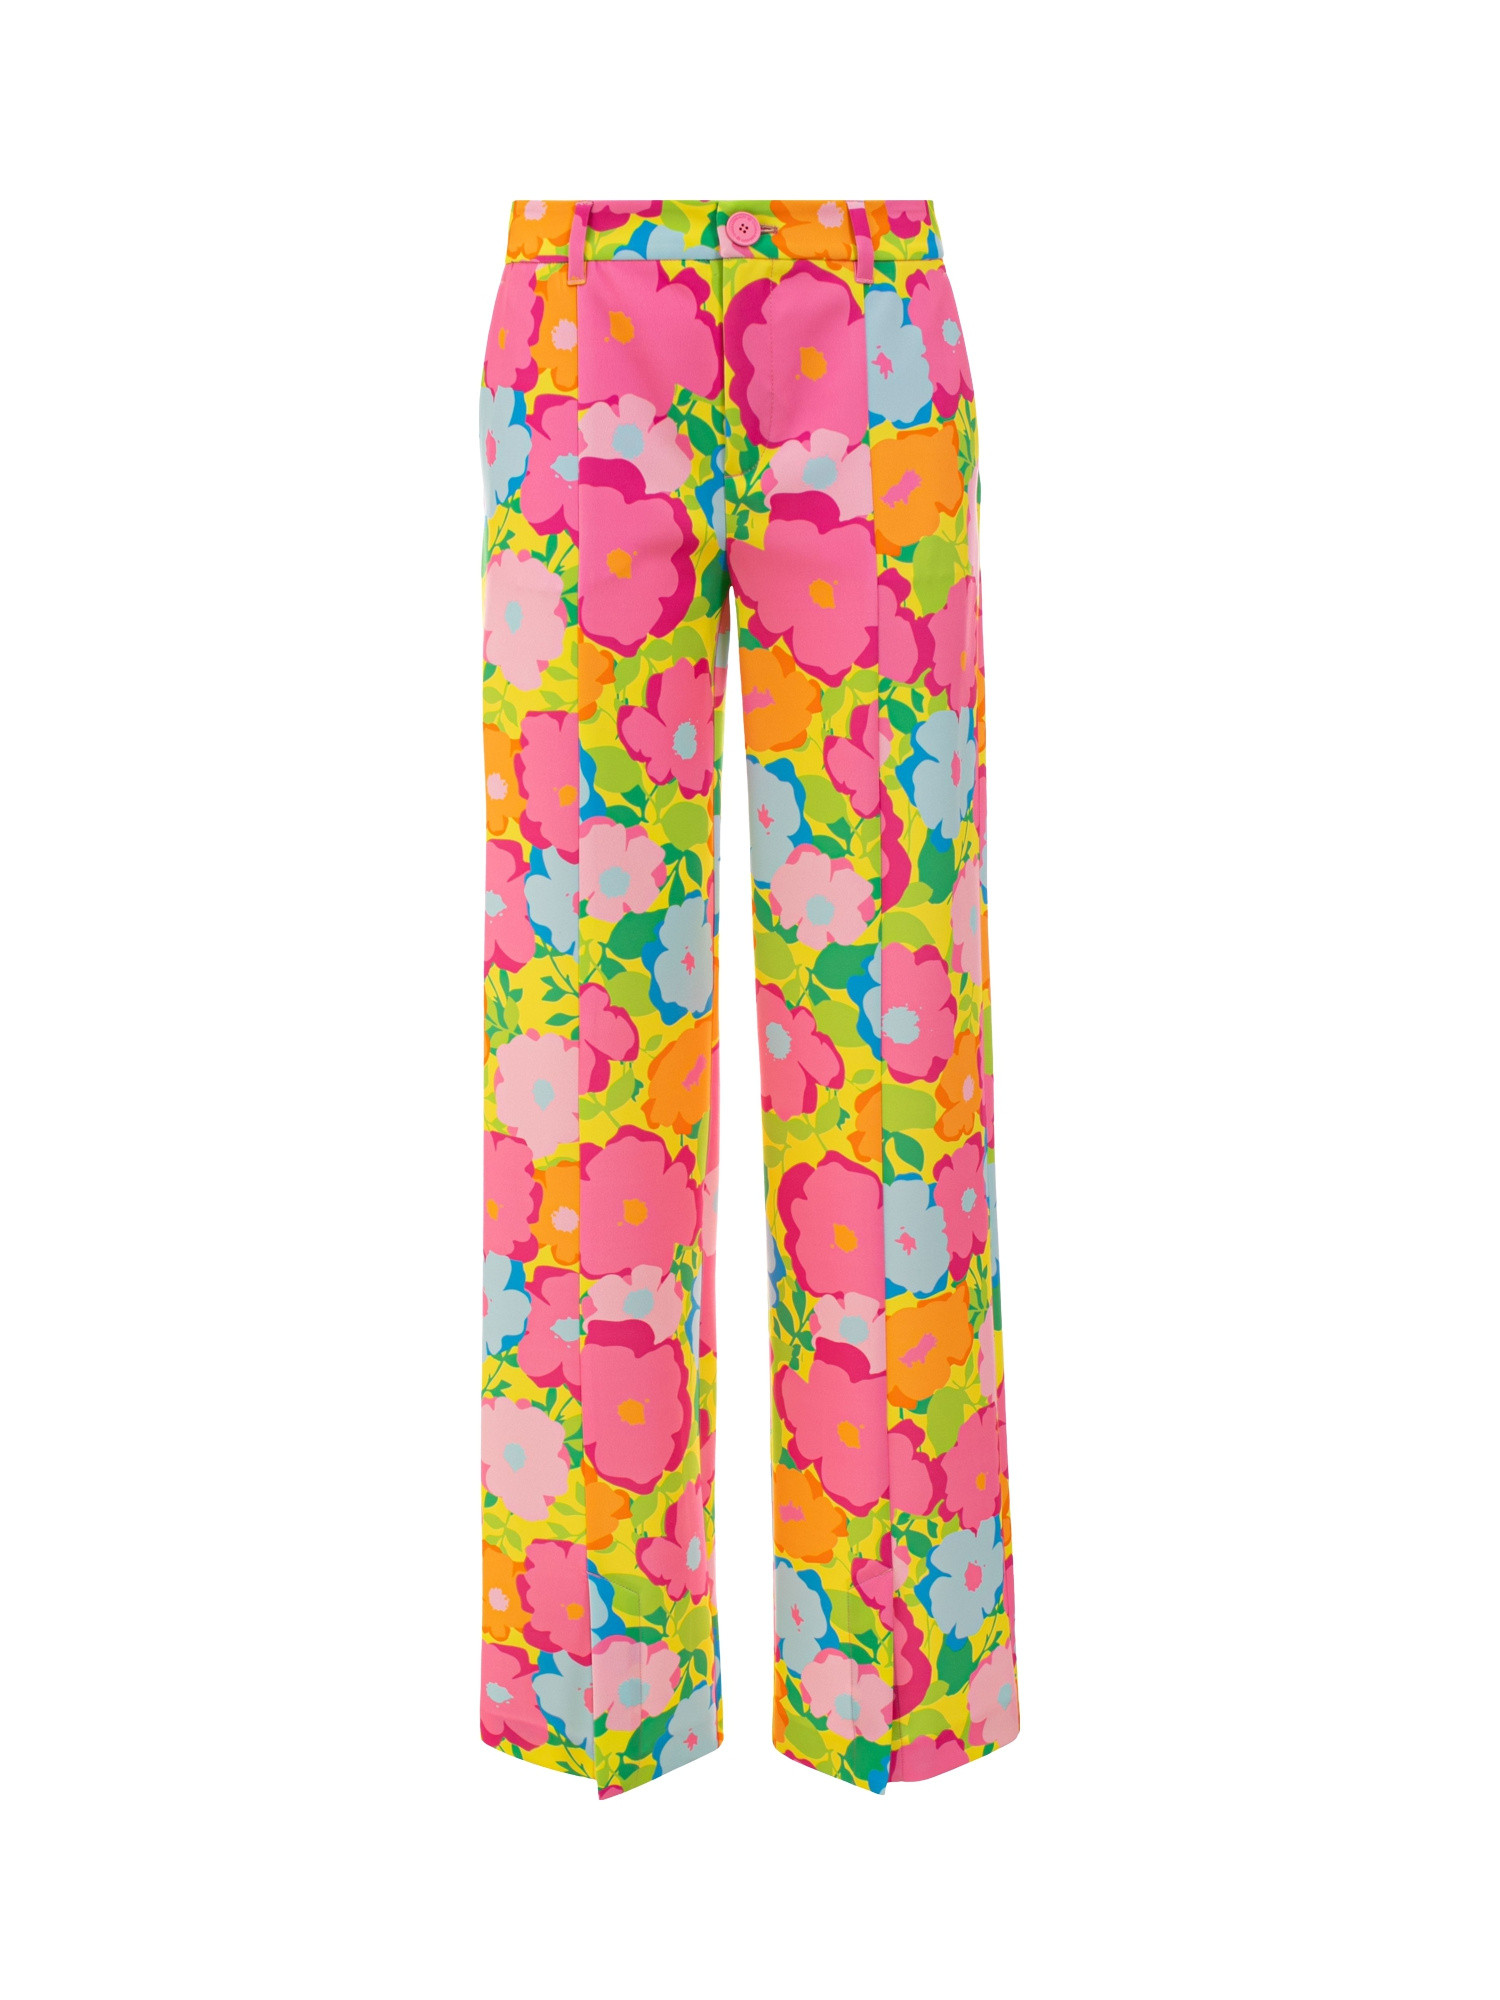 Chiara Ferragni - Pantalone in cady stampa flower, Multicolor, large image number 0